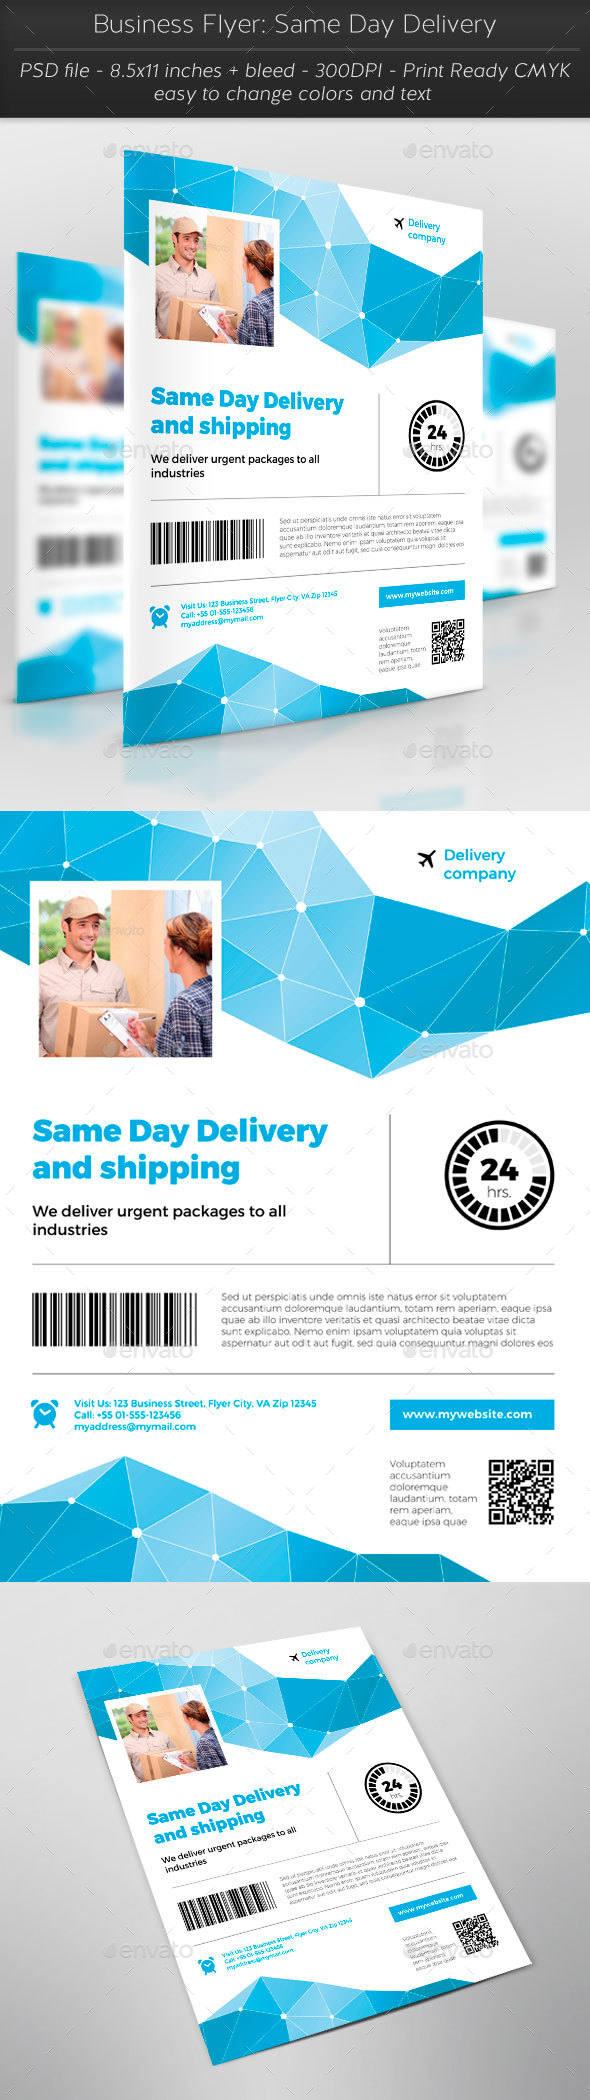 Business Flyer: Same Day Delivery